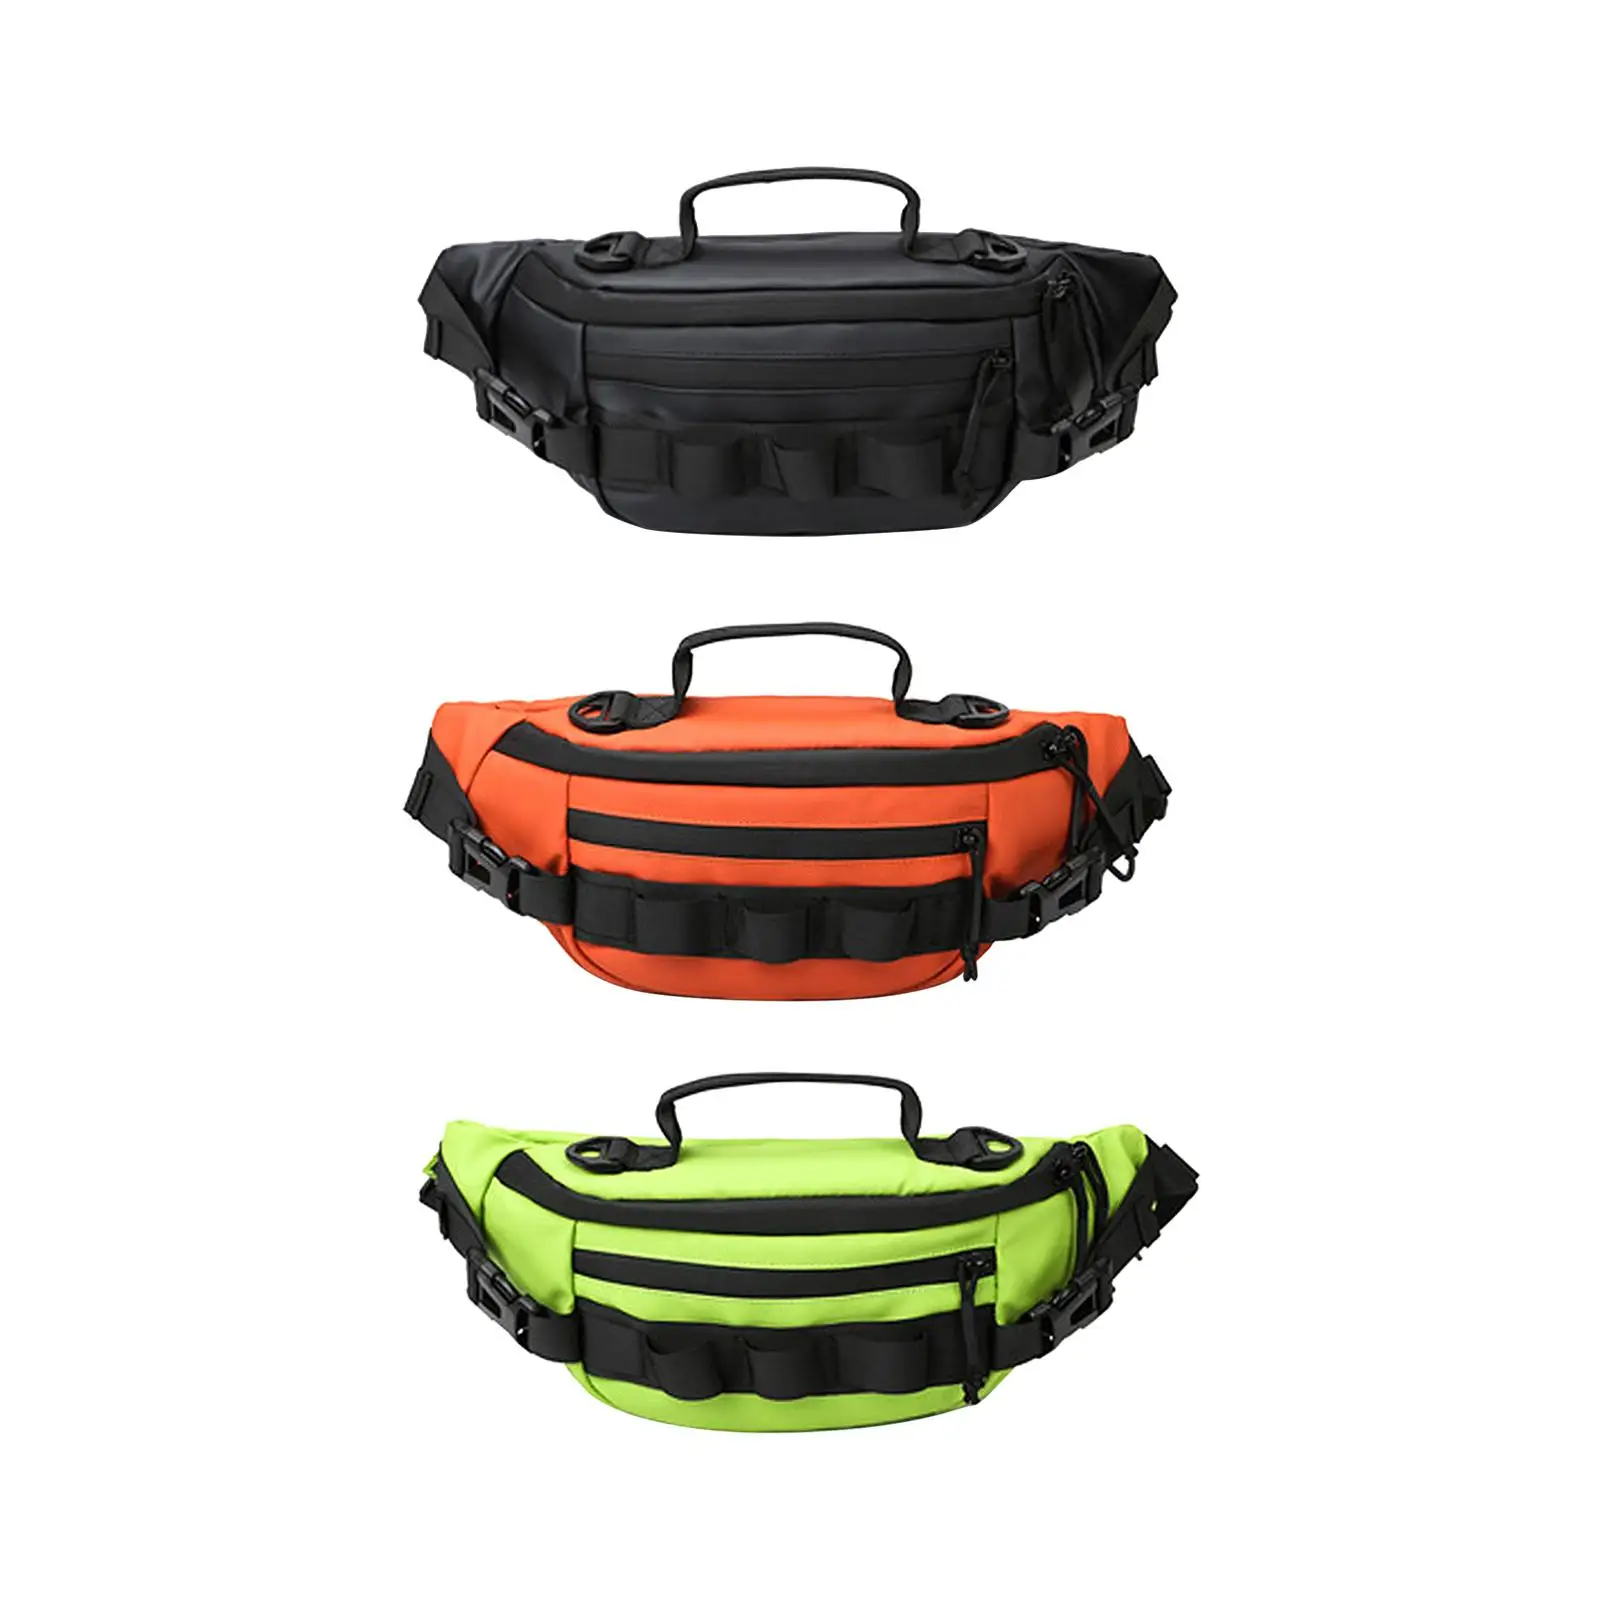 Waist Bag Pack Hip Bag Equipment Lightweight Casual Fishing Tackle Bag Lure Fishing Bag for Sports Hiking Outdoor Camping Men